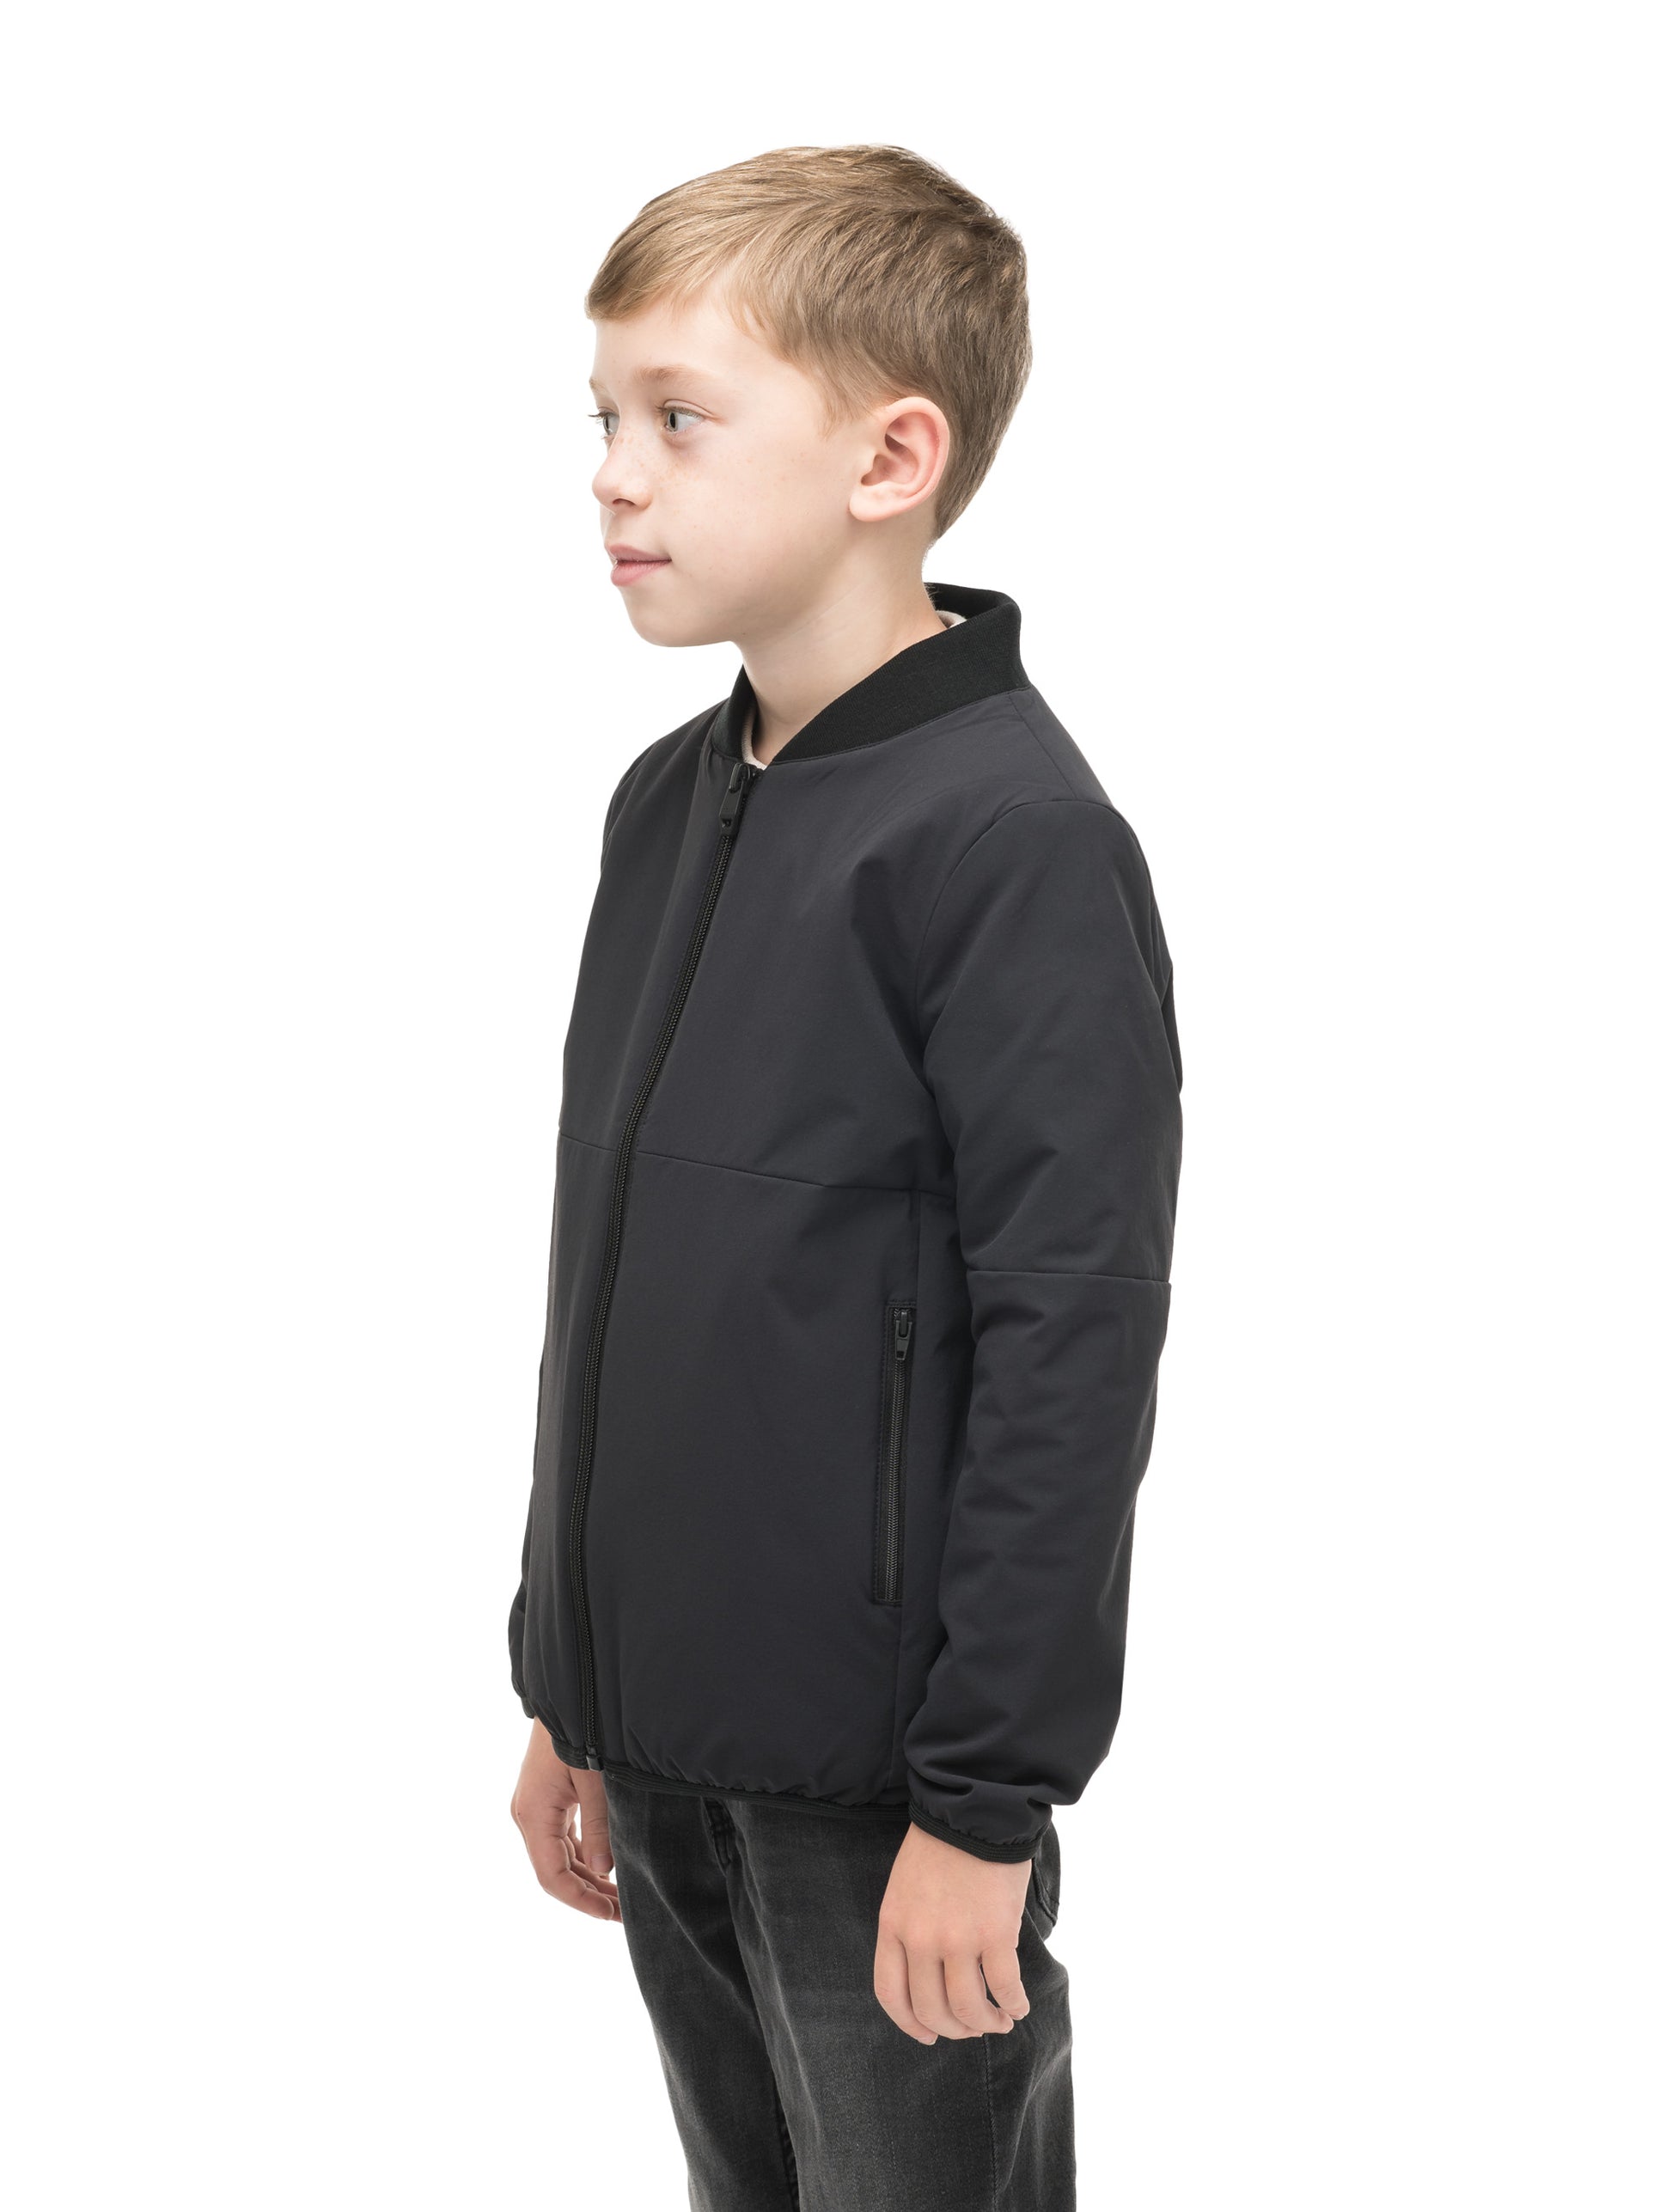 Little Ursa Kids Mid Layer Jacket in hip length, Primaloft Gold Insulation Active, ribbed collar, and two-way front zipper, in Black